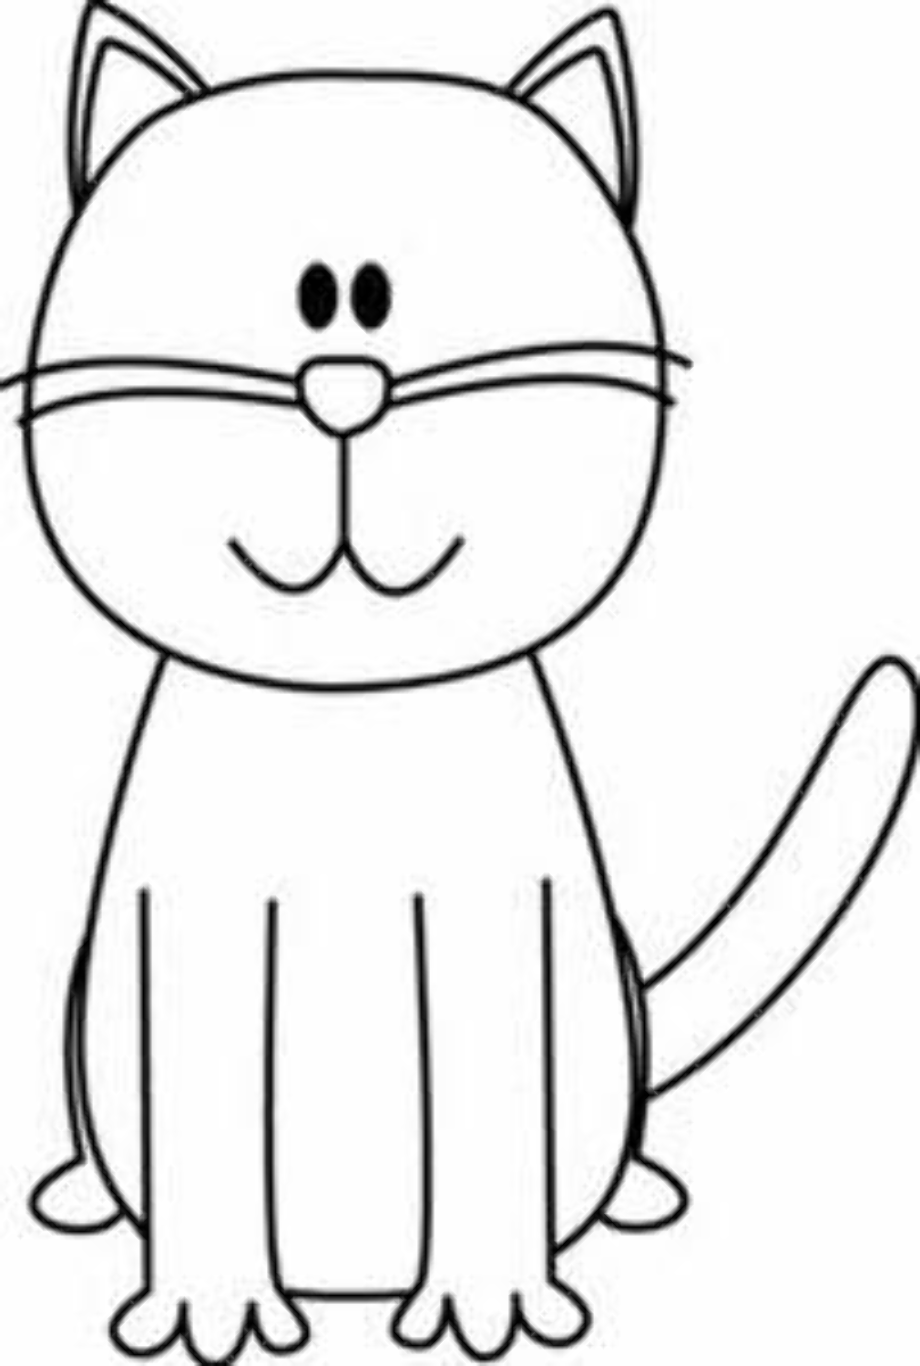 Download High Quality clipart cat simple Transparent PNG Images - Art